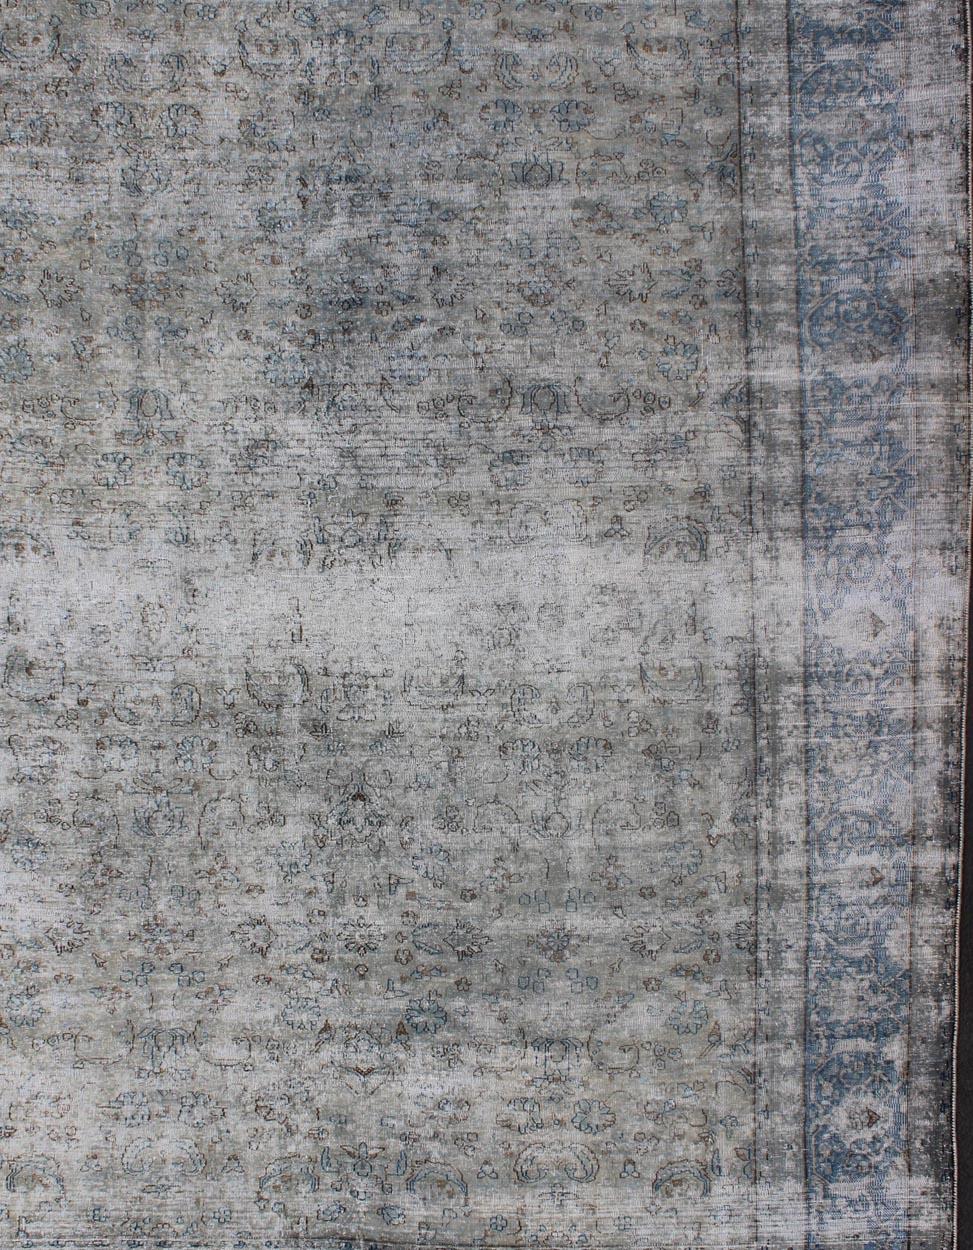 Hand-Knotted Blue/Gray Vintage Persian Distressed Rug with Modern and Rustic Design